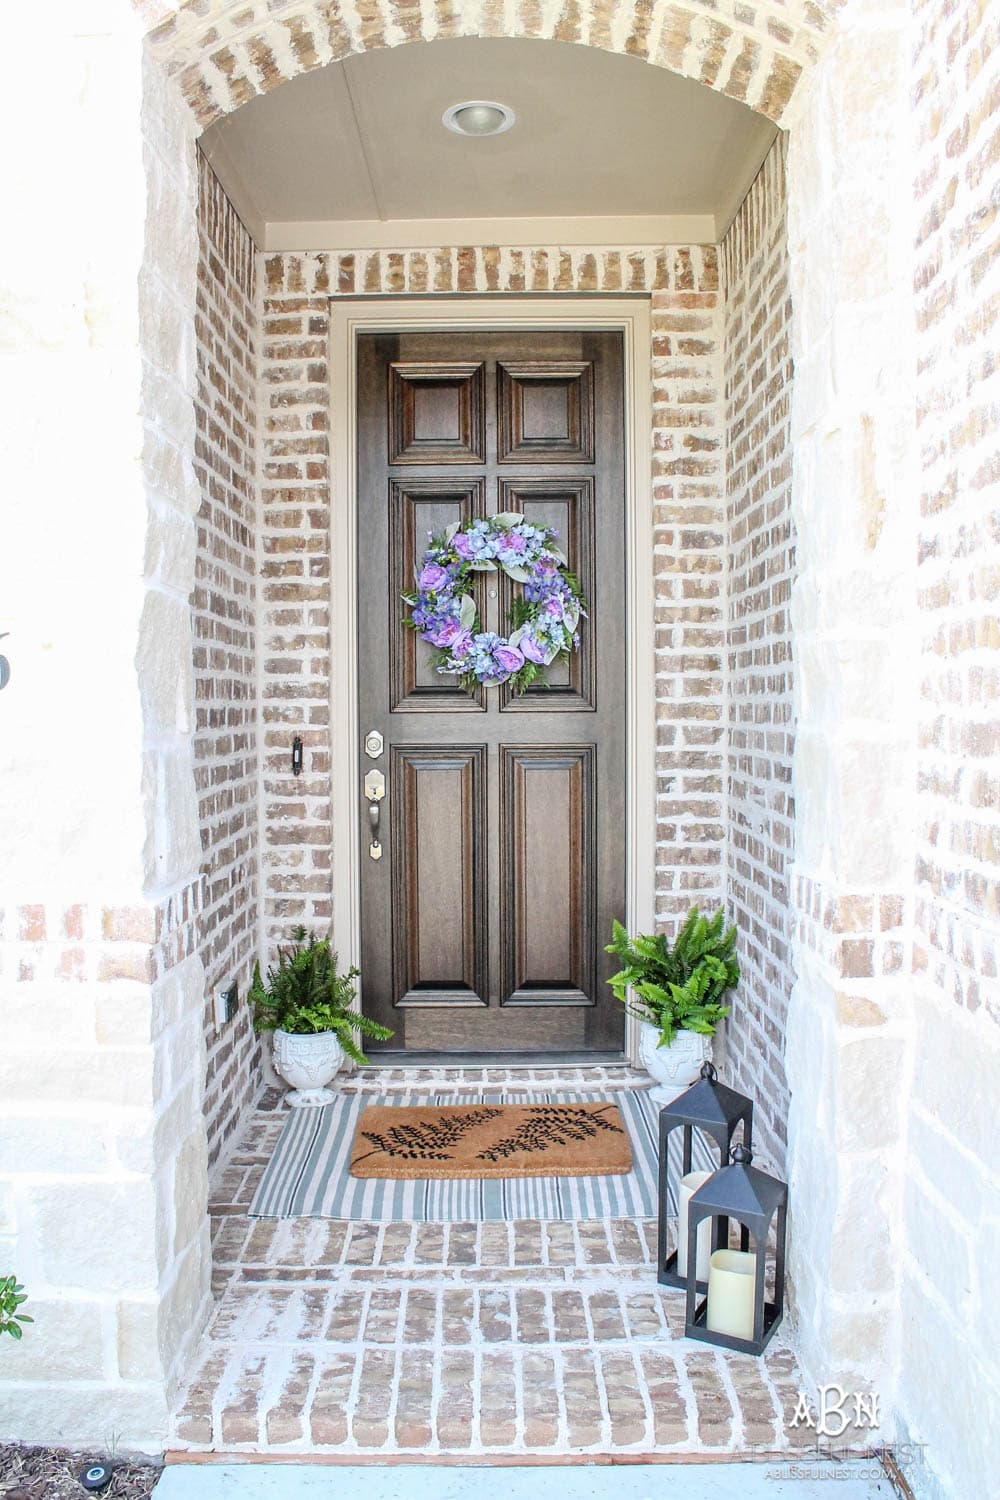 My Summer Front Porch + Entryway Reveal - A Blissful Nest